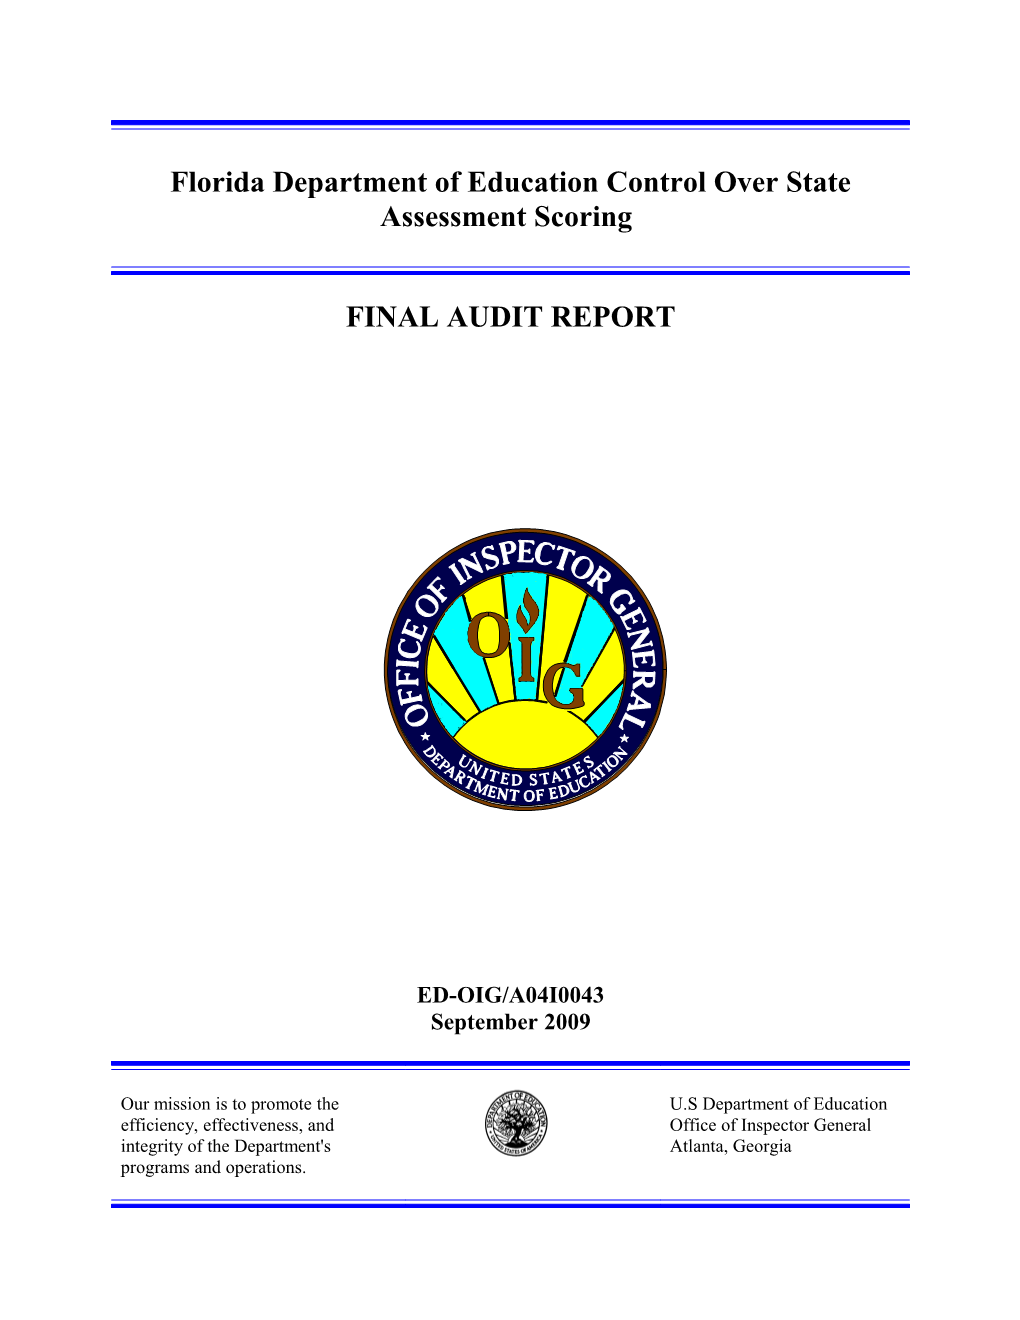 Audit A04I0043 - Florida Department of Education Control Over State Assessment Scoring (MS Word)